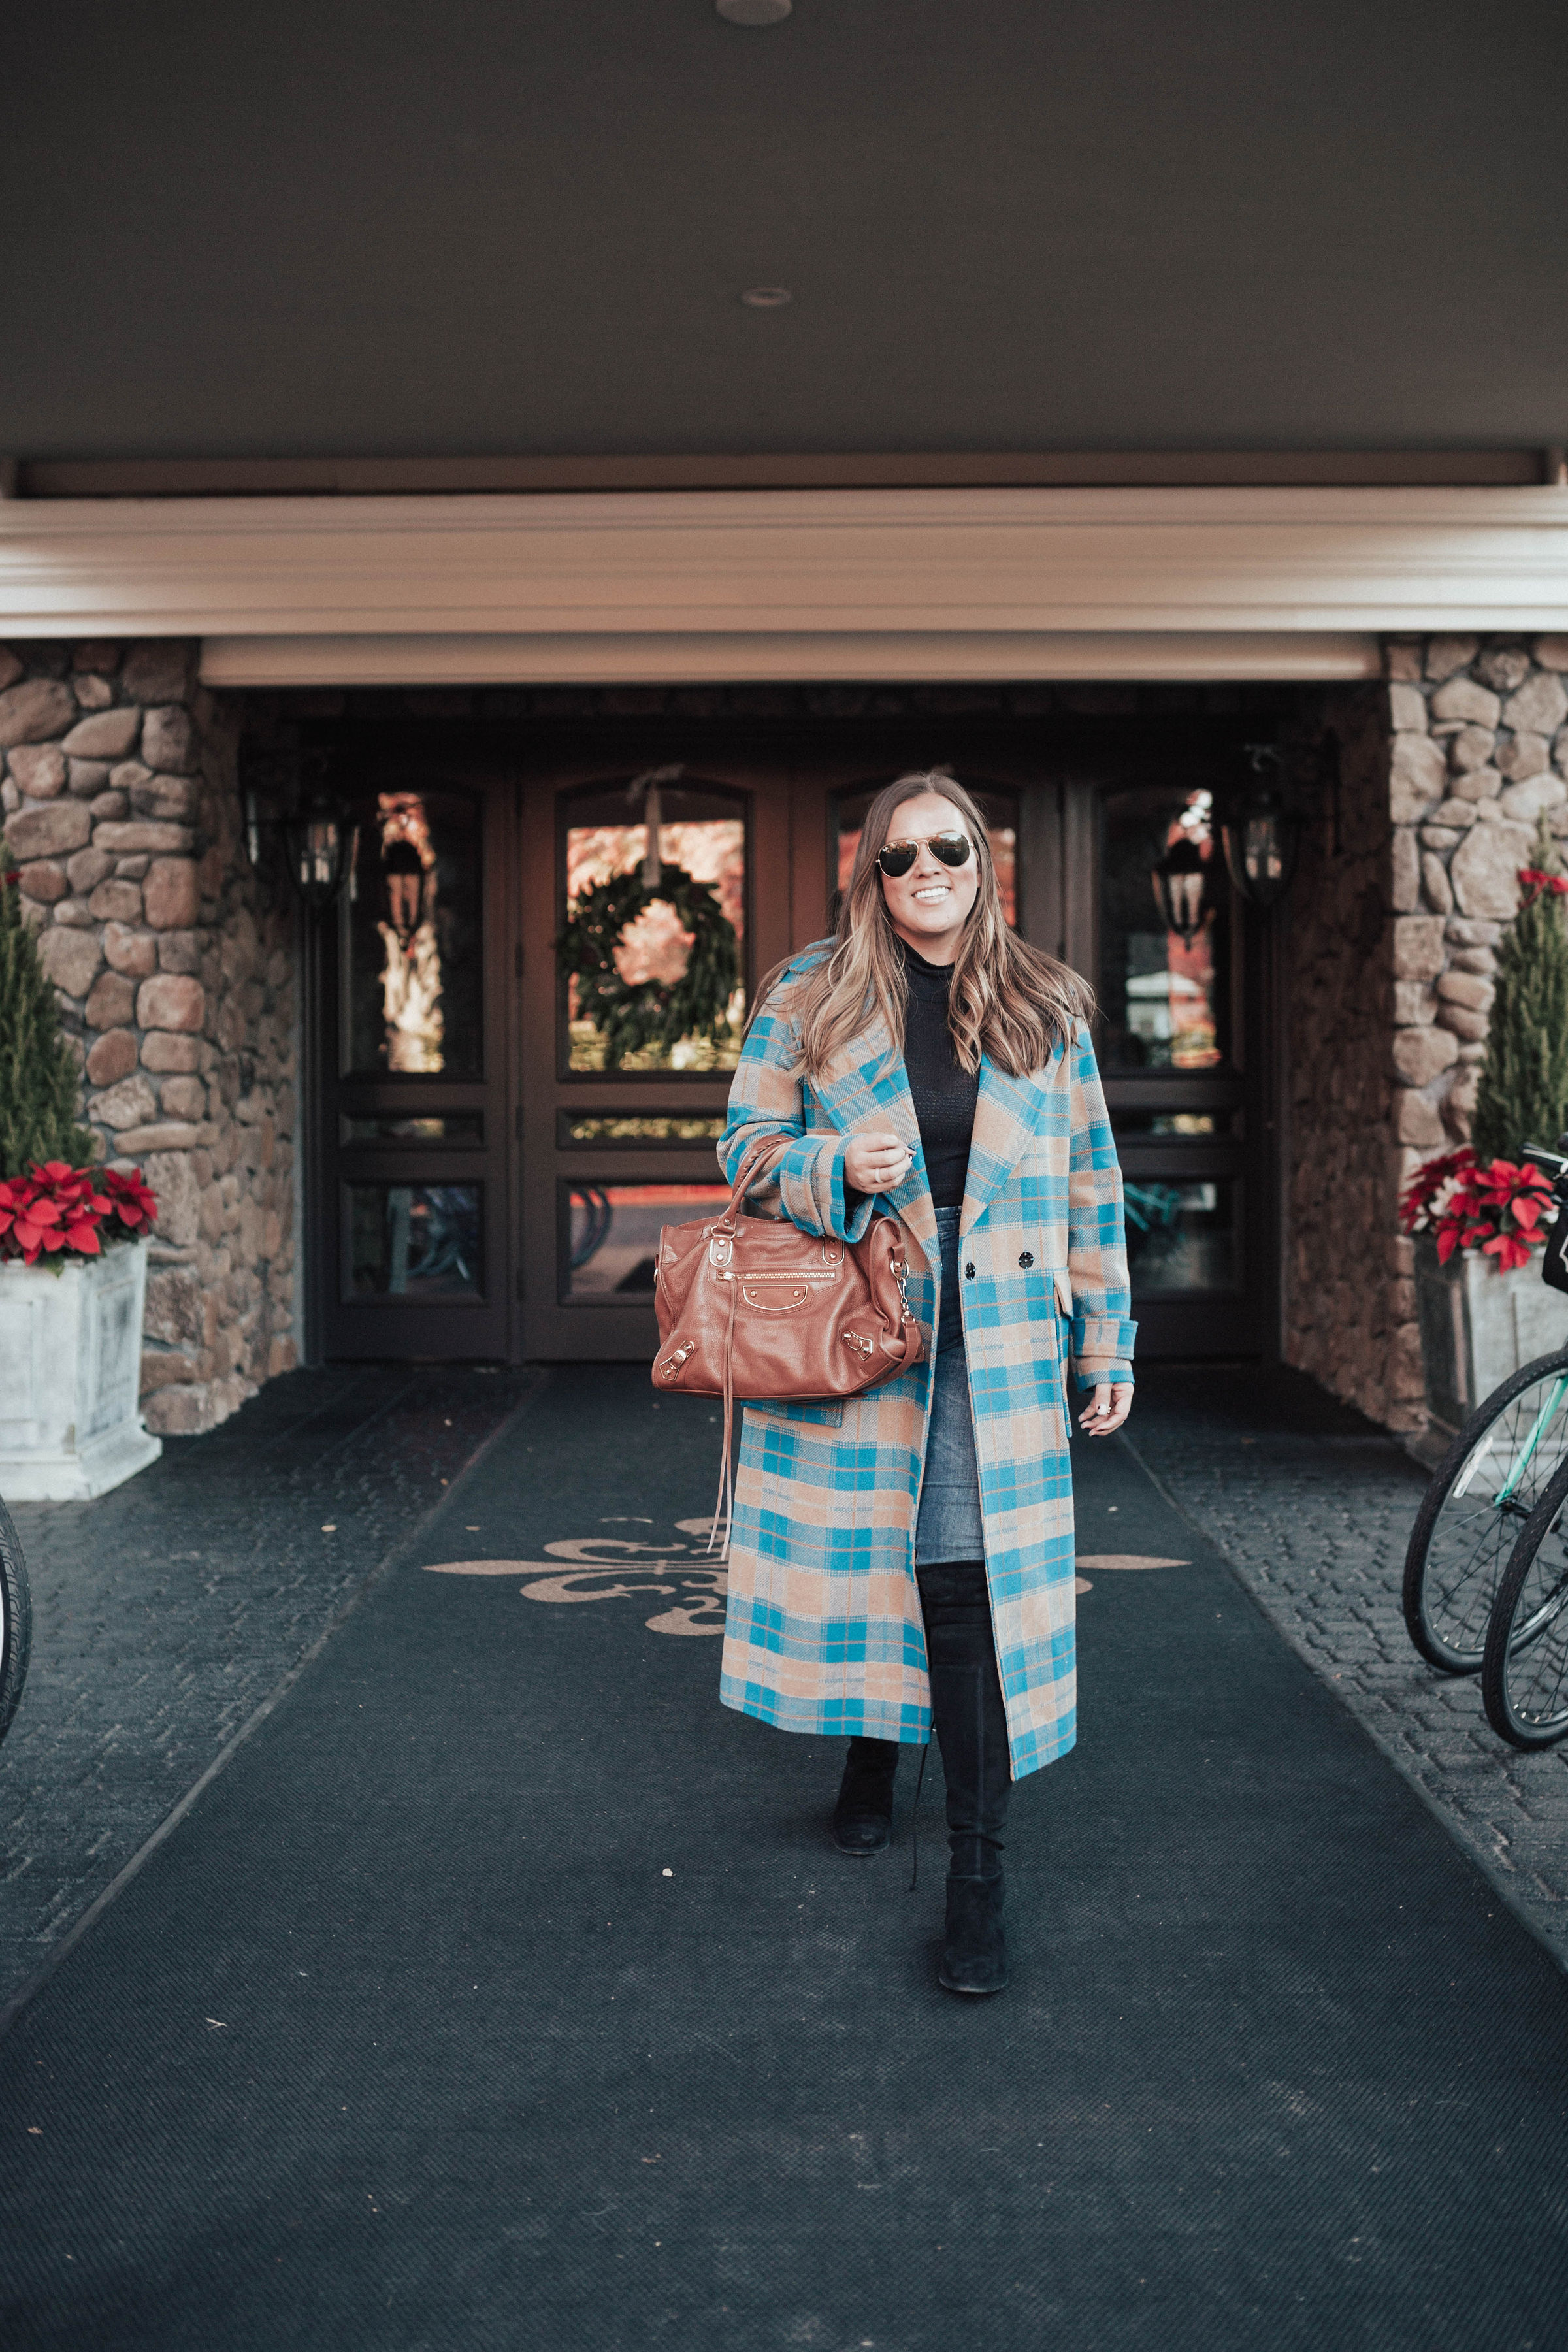 San Francisco blogger Ashley Zeal from Two Peas in a Prada shares her travel tips for 24 hours in Yountville. Including where to stay, eat and what to do. 